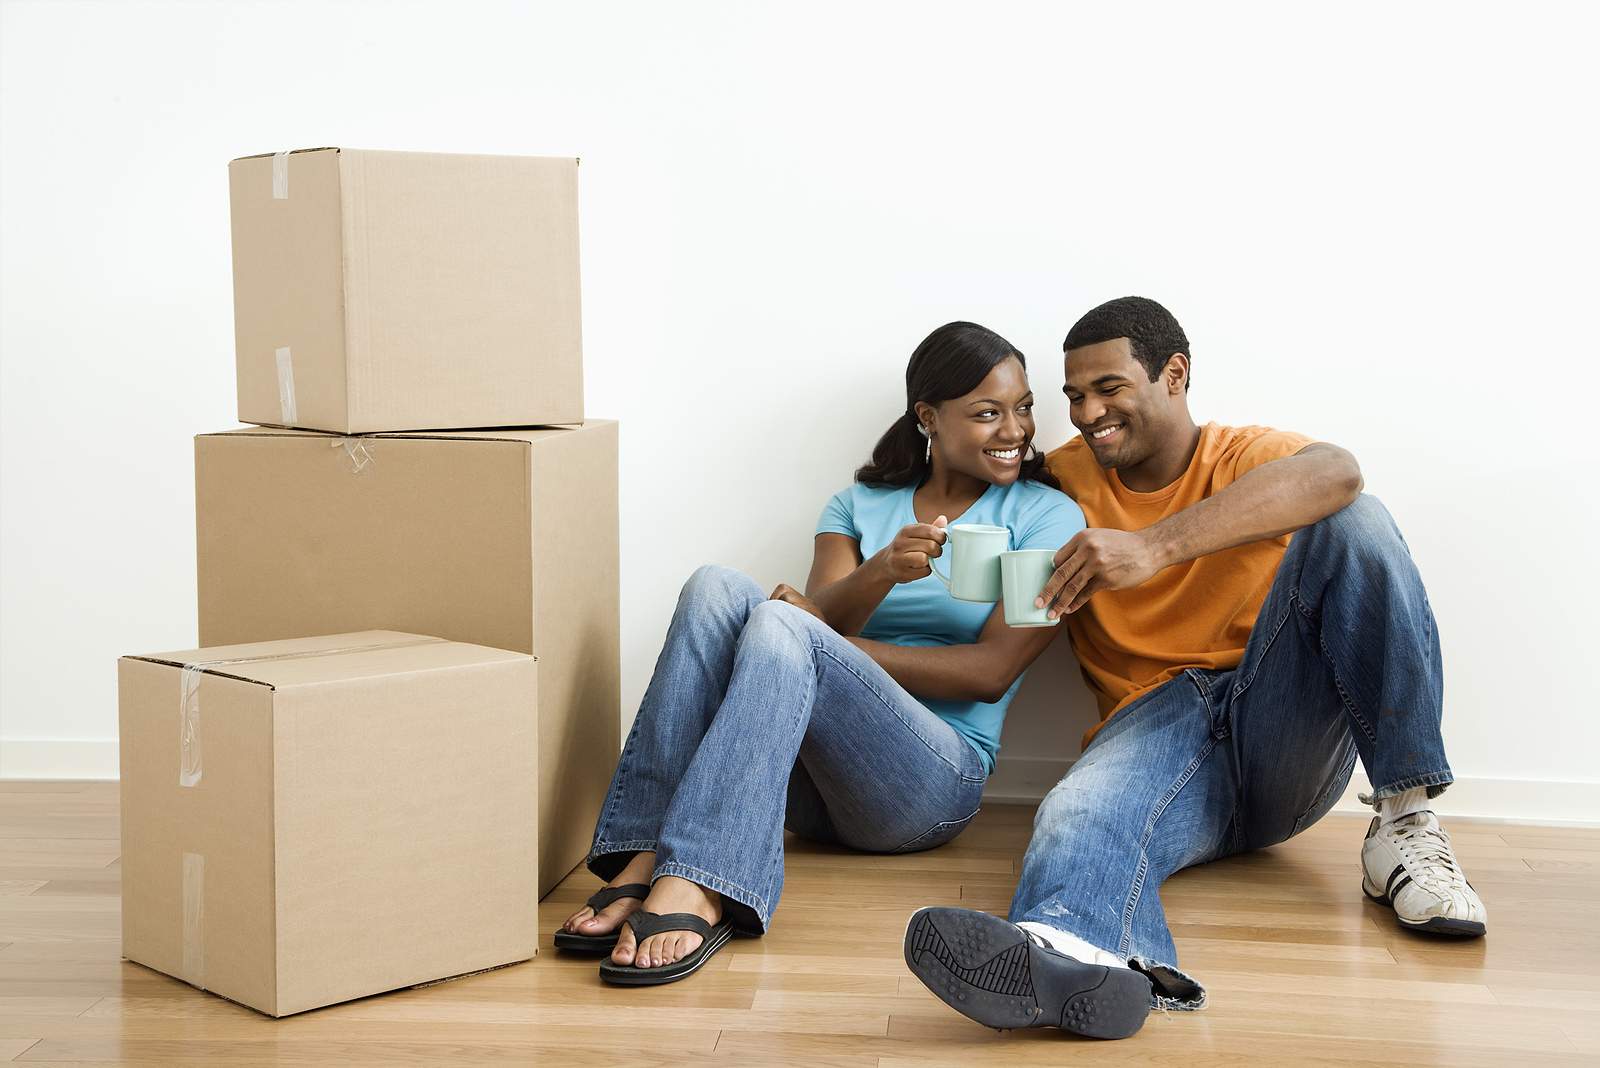 African American male and female couple sitting on floor next to moving boxes relaxing.